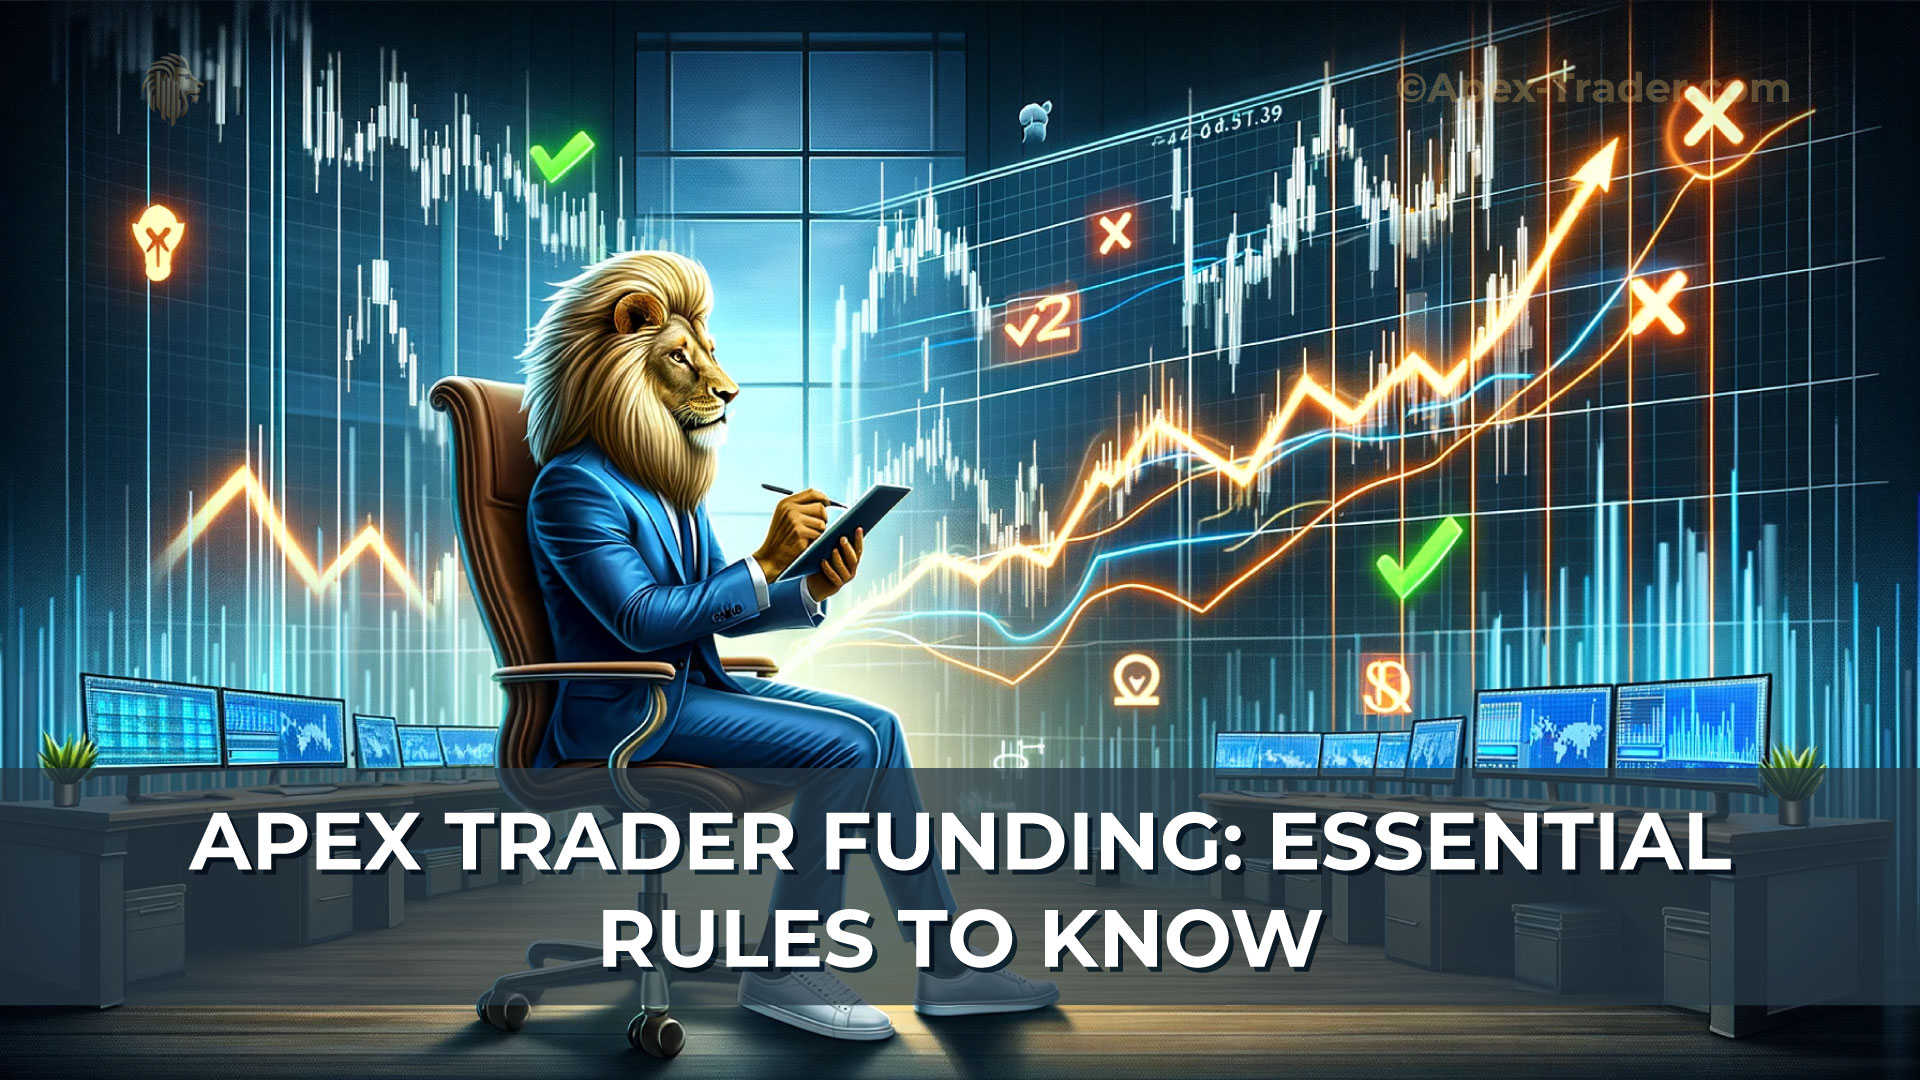 Apex-Trader-Funding-Essential-Rules-to-Know-On-Apex-Trader-Website